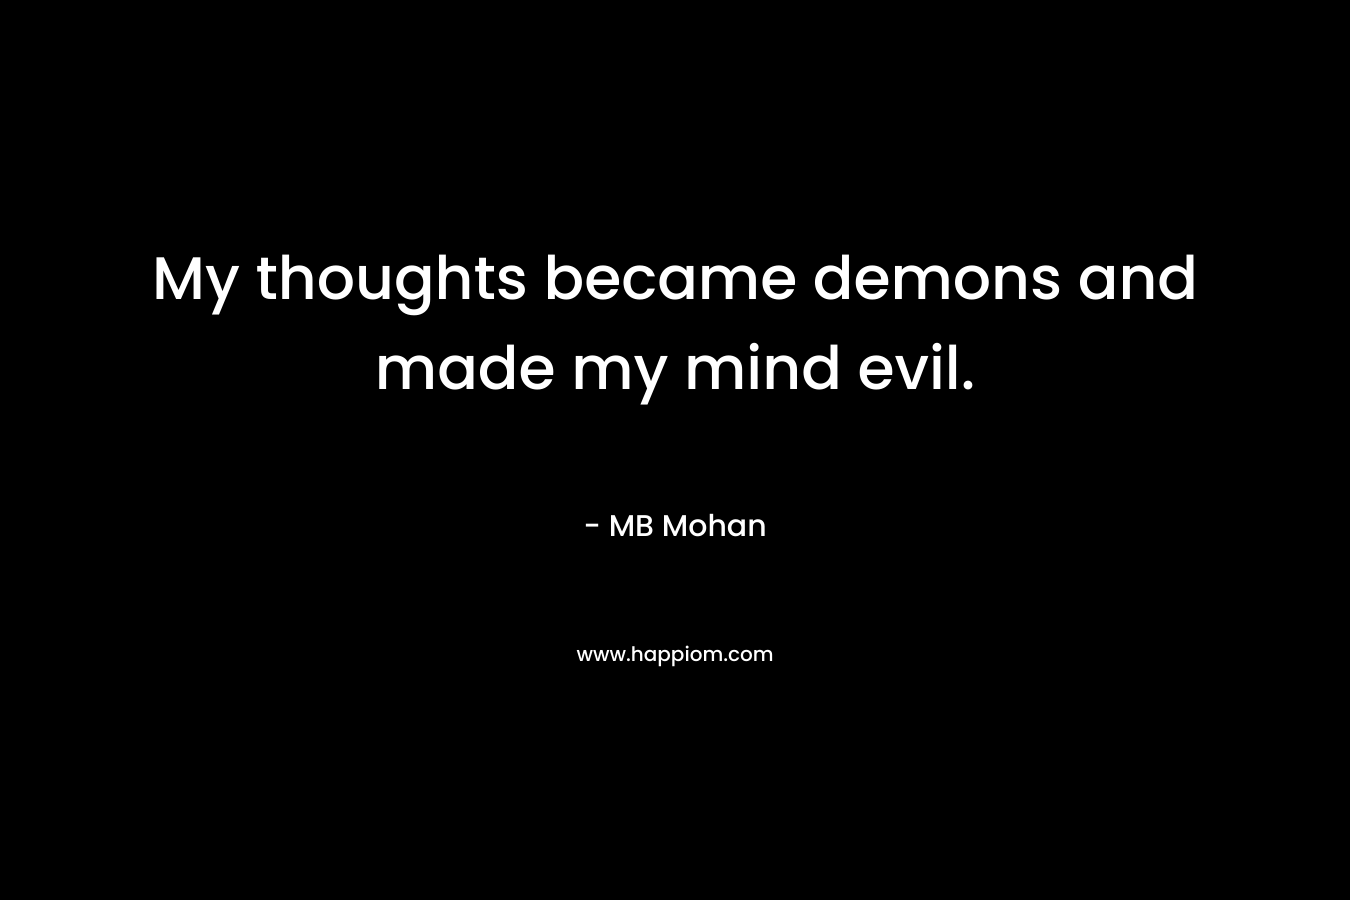 My thoughts became demons and made my mind evil.